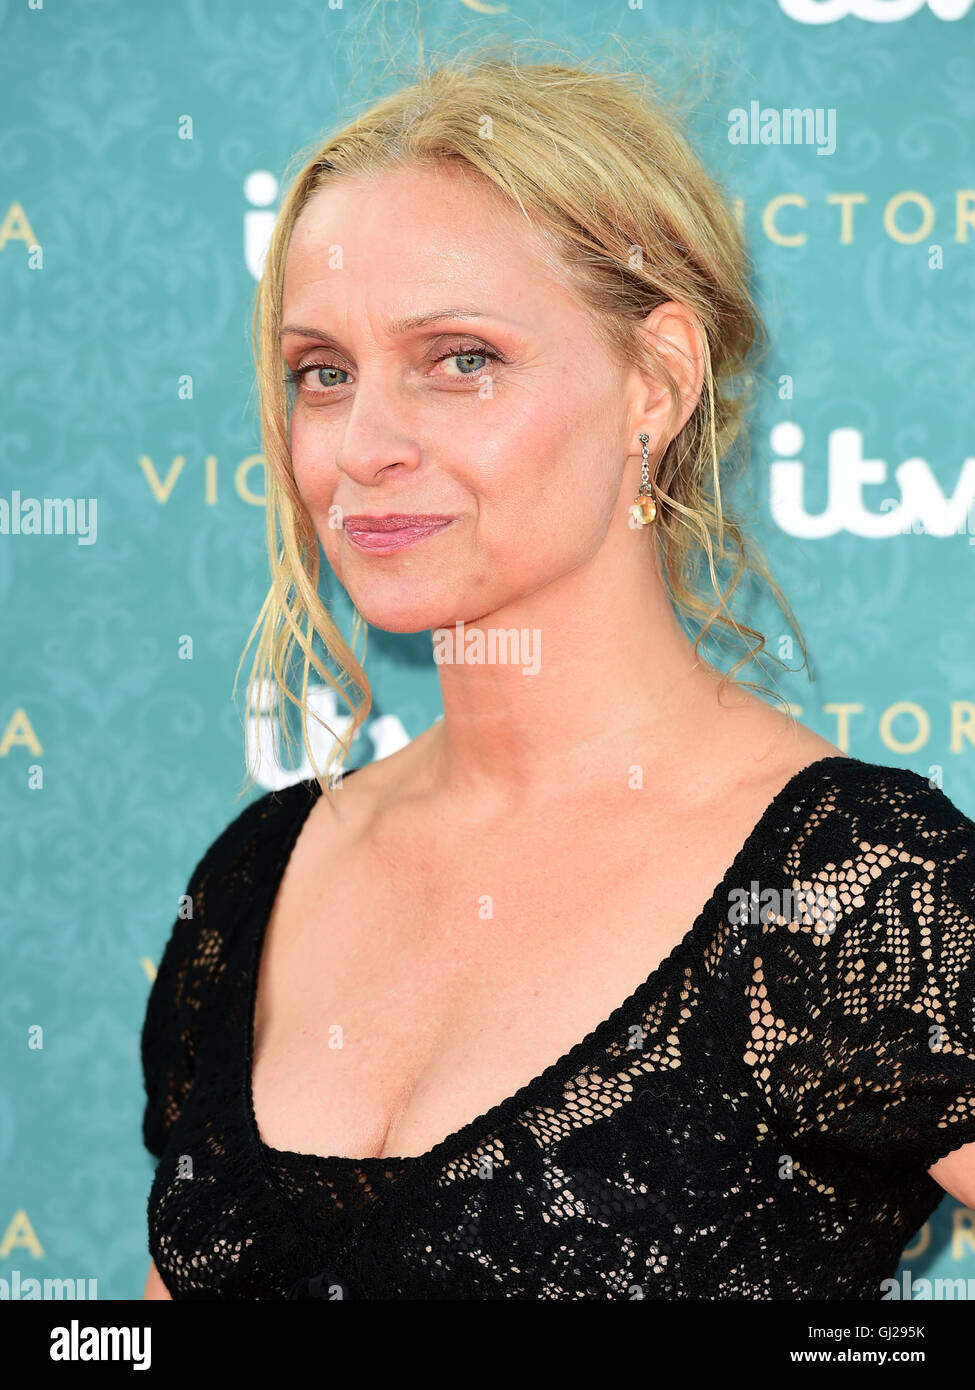 Catherine Flemming attending the world premiere screening of ITV's Victoria at Kensington Palace, London. PRESS ASSOCIATION Photo. Picture date: Thursday 11th August, 2016. Photo credit should read: Ian West/PA Wire. Stock Photo